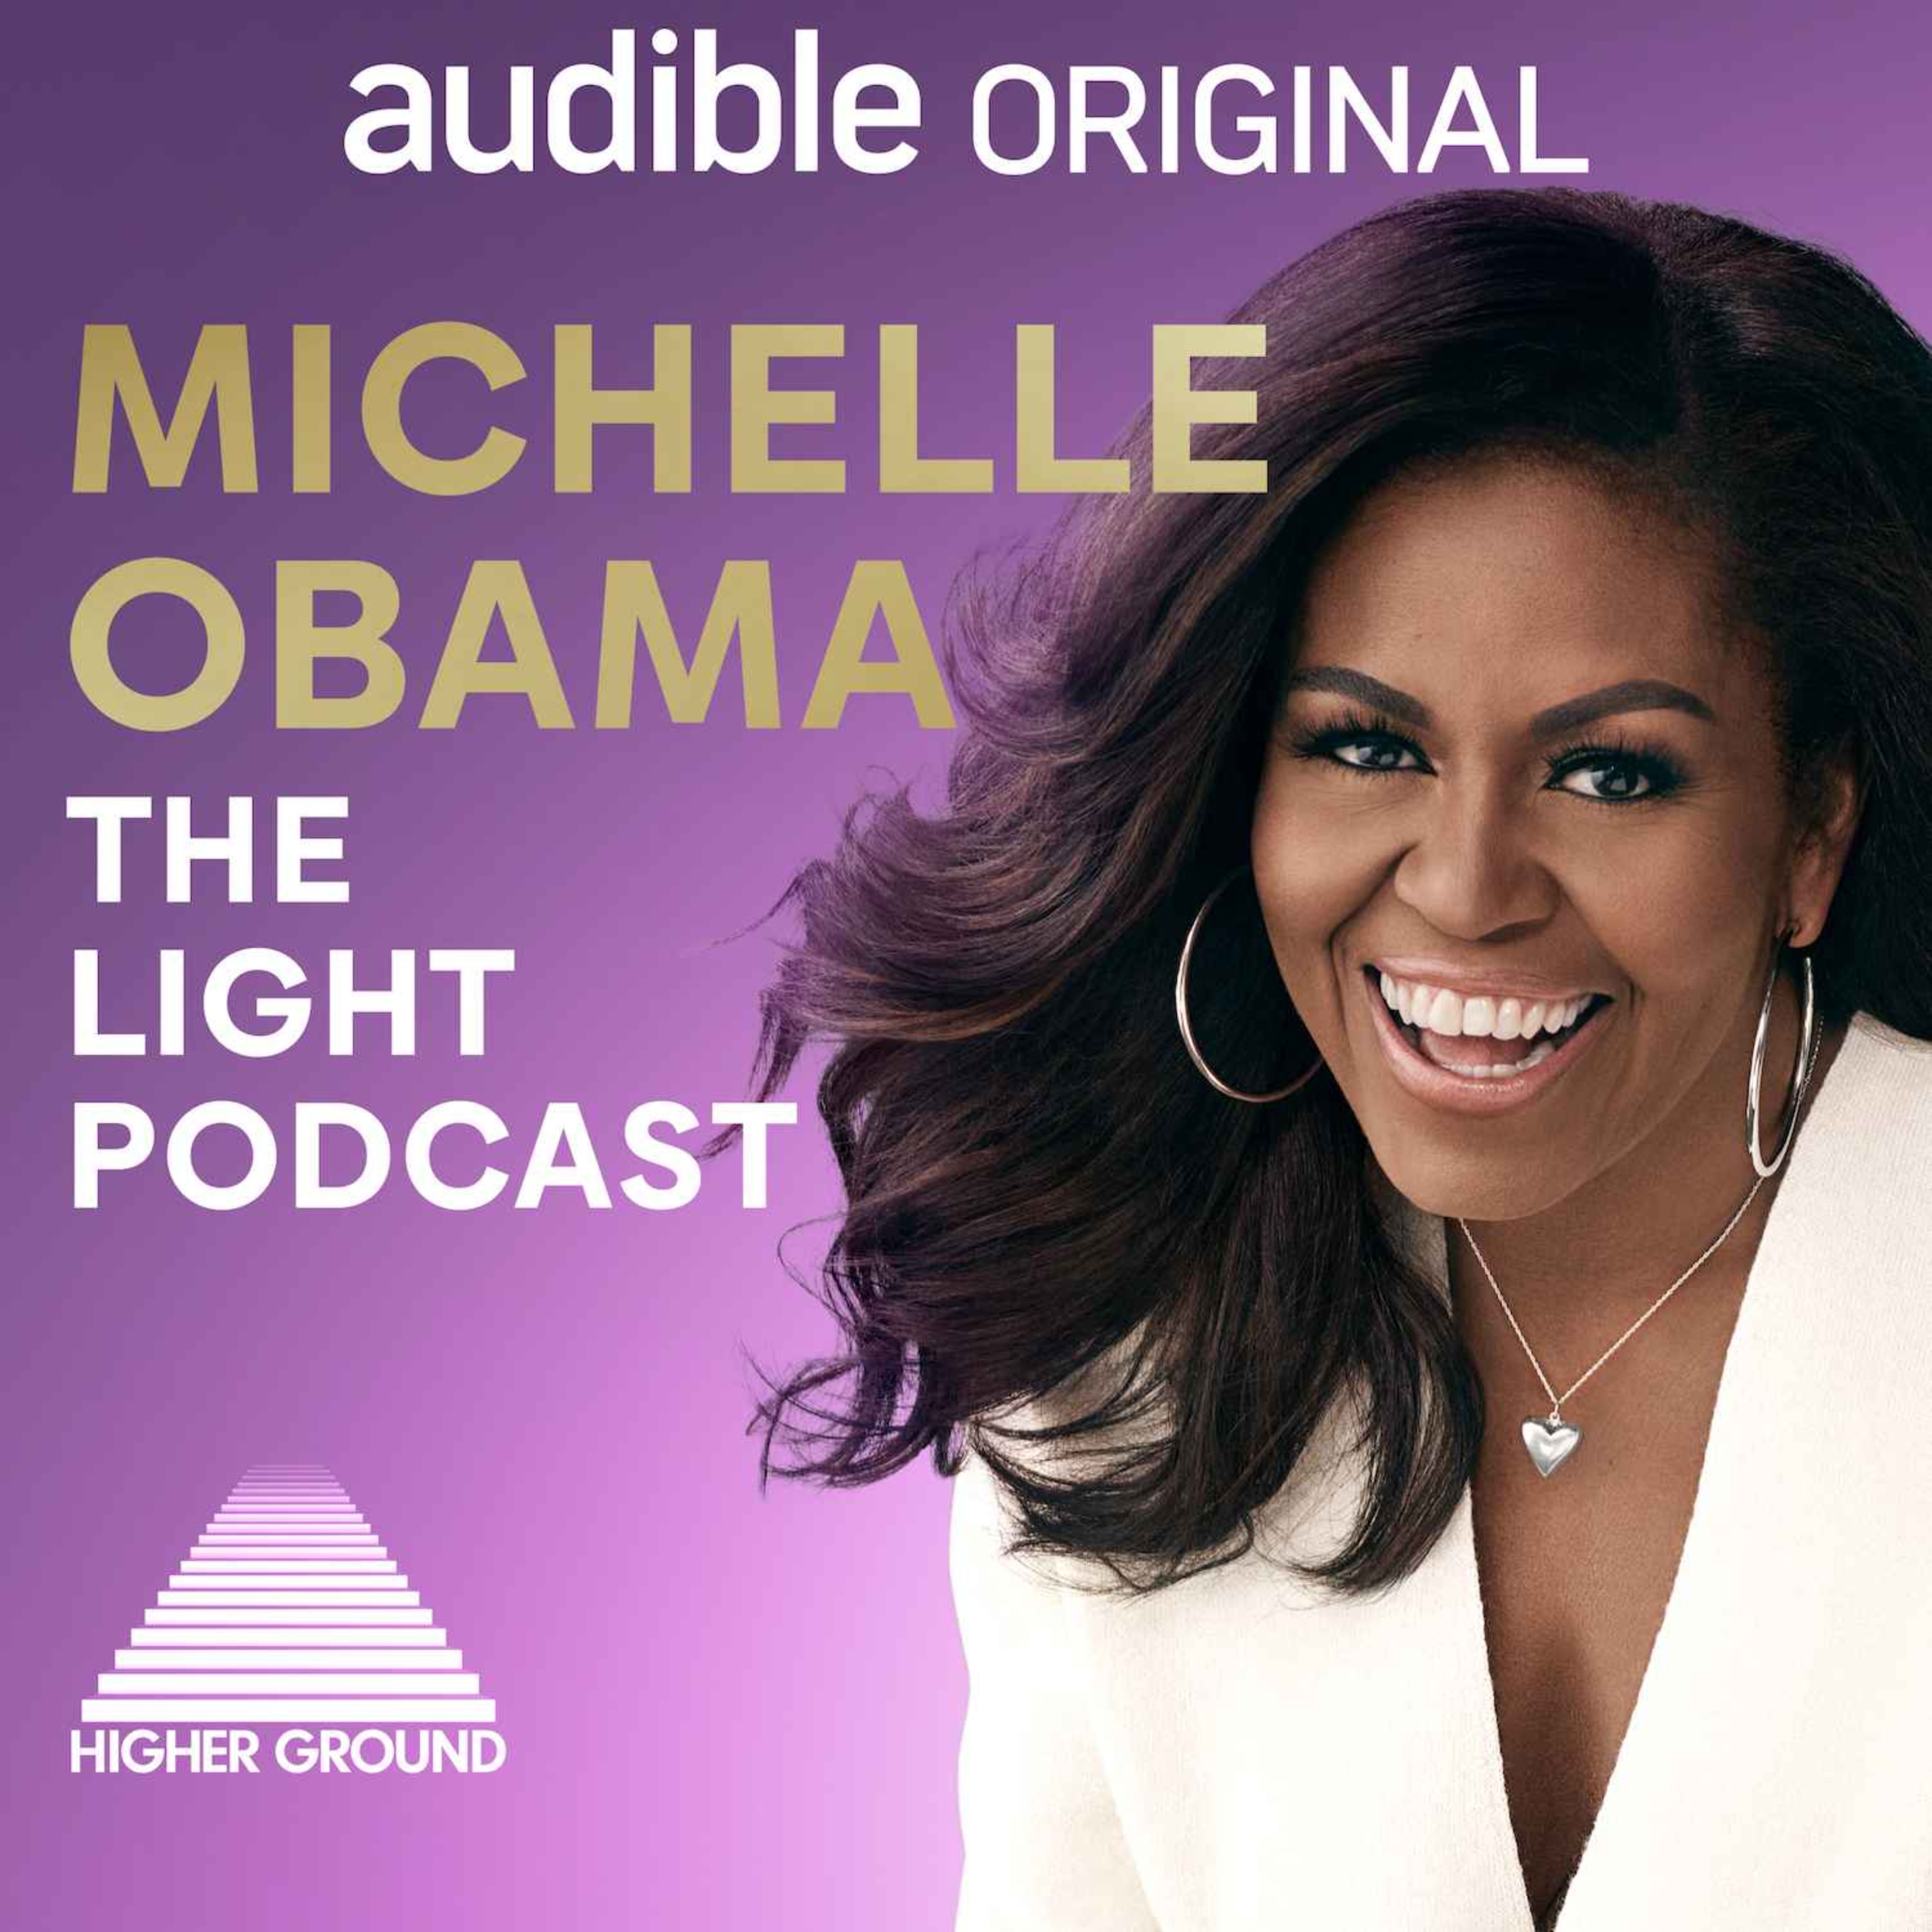 Introducing Michelle Obama: The Light Podcast